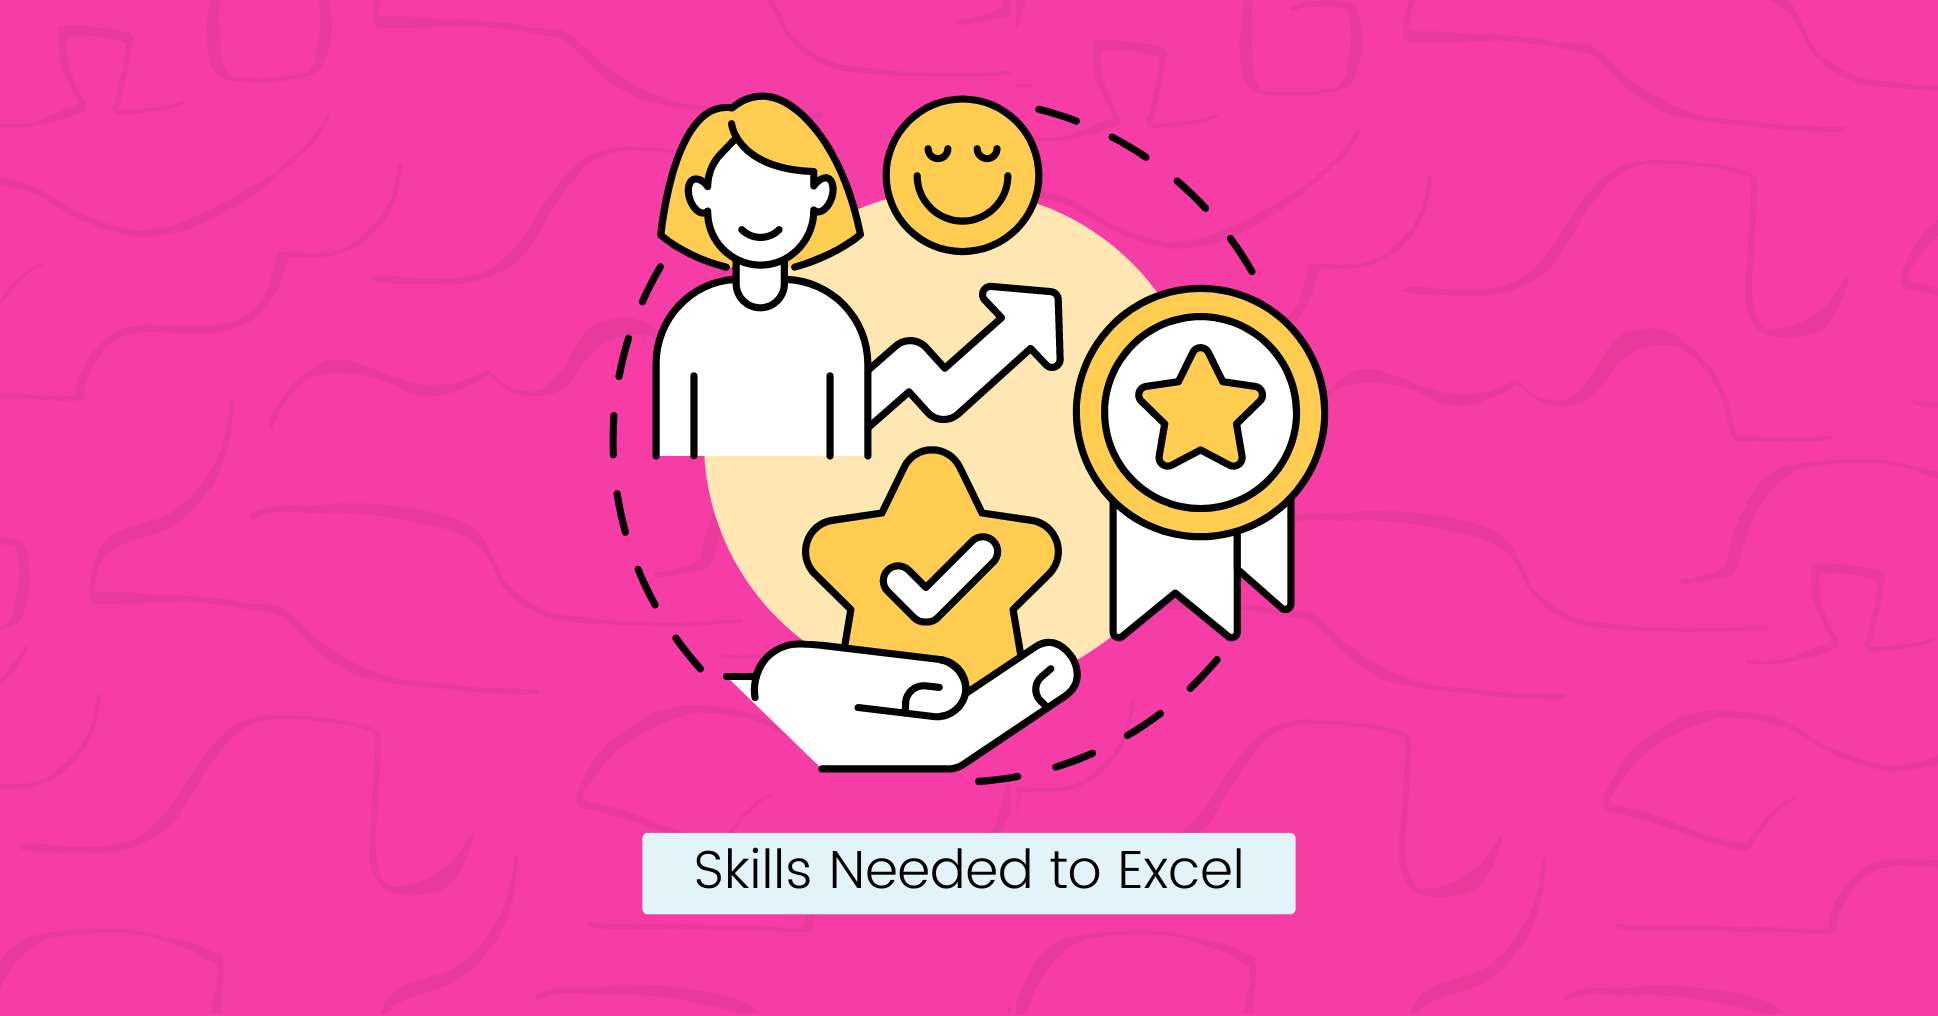 Skills Needed to Excel